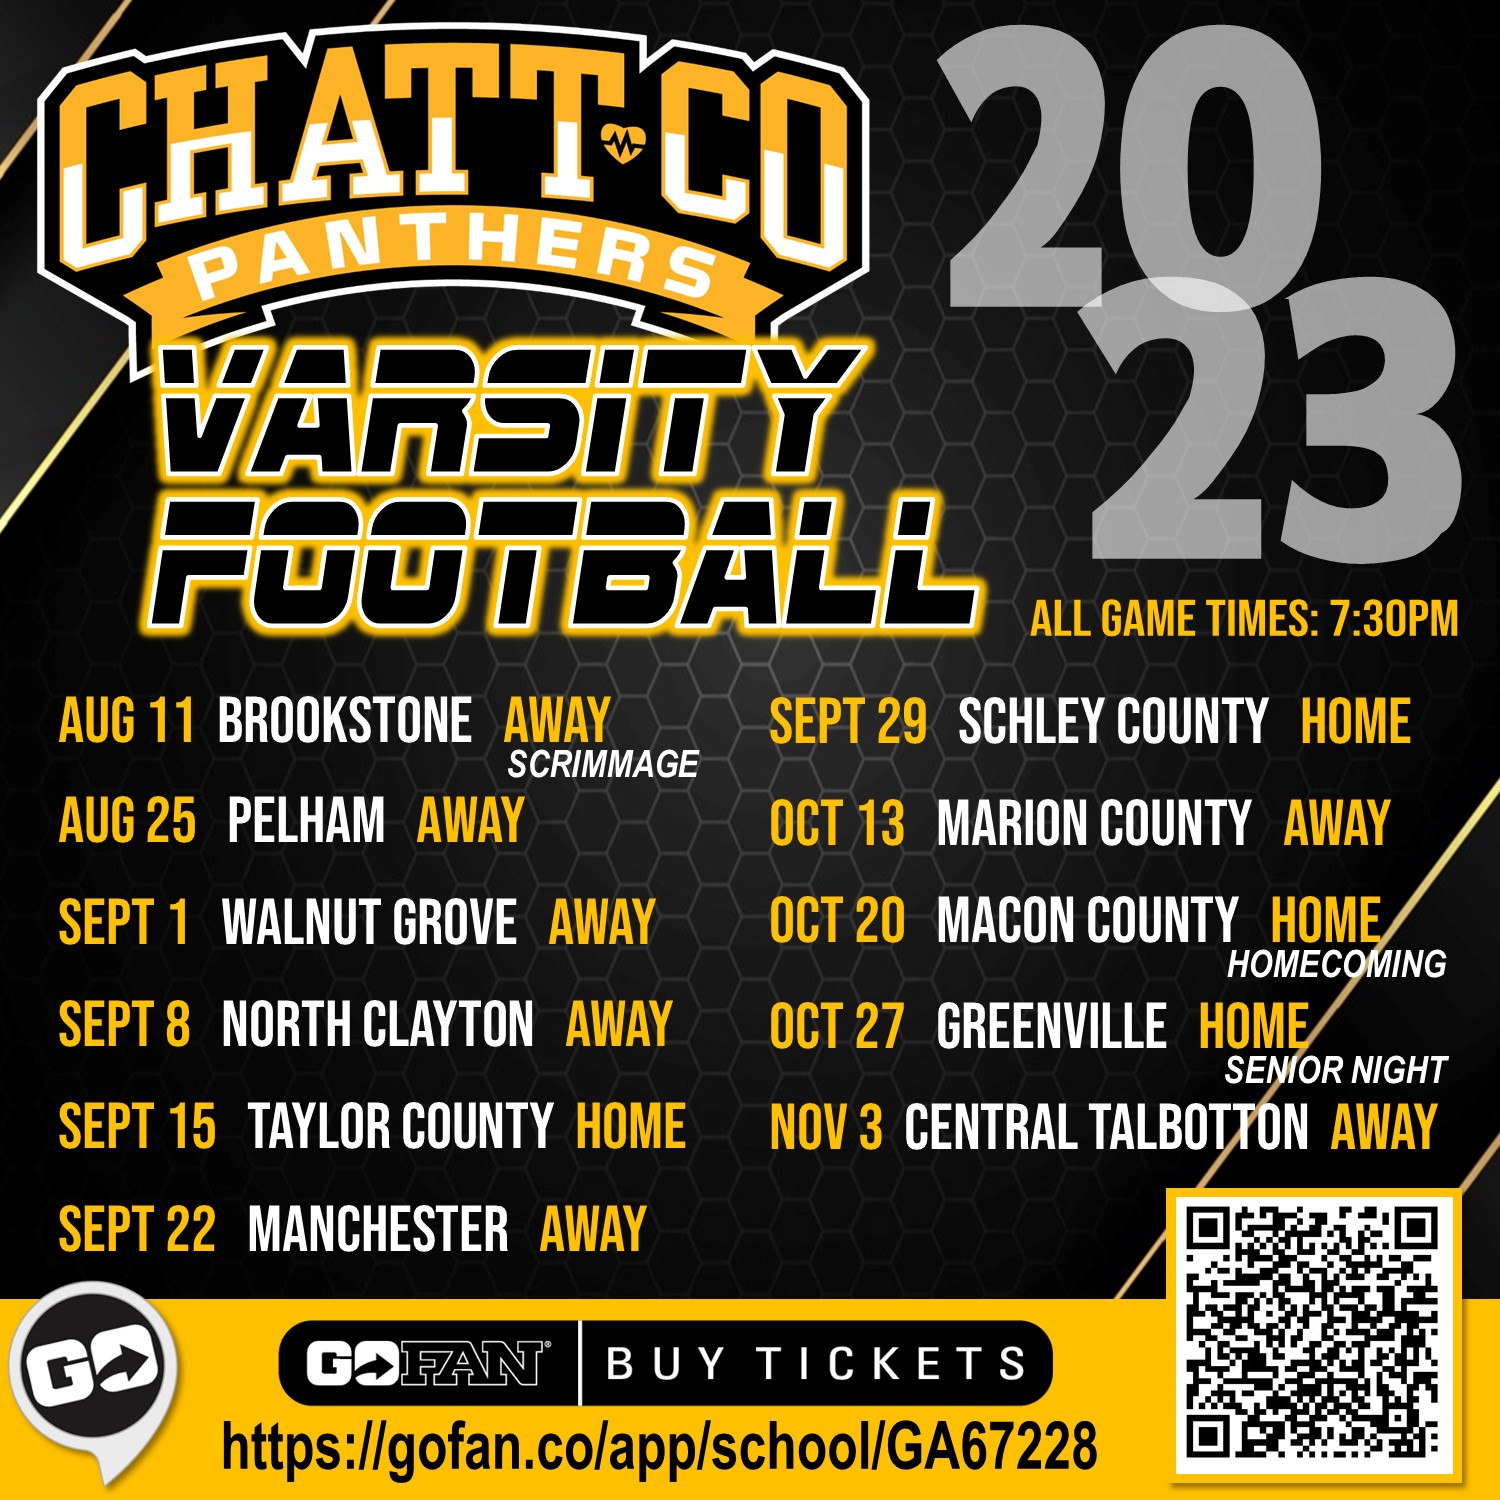 ChattCo Panthers Varsity Football 2023 AUG 11  Brookstone (scrimmage) AWAY AUG 25  Pelham  AWAY SEPT 1  Walnut Grove  AWAY SEPT 8  North Clayton  AWAY SEPT 15  Taylor County HOME Sept 22 Manchester AWAY SEPT 29  Schley County HOME OCT 13  Marion County  AWAY OCT 20  Macon County (Homecoming) HOME OCT 27  Greenville (Senior Night)  HOME NOV 3  Central (Talbotton) AWAY  All Game Times 7:30pm Go Fan Buy Tickets: https://gofan.co/app/school/GA67228